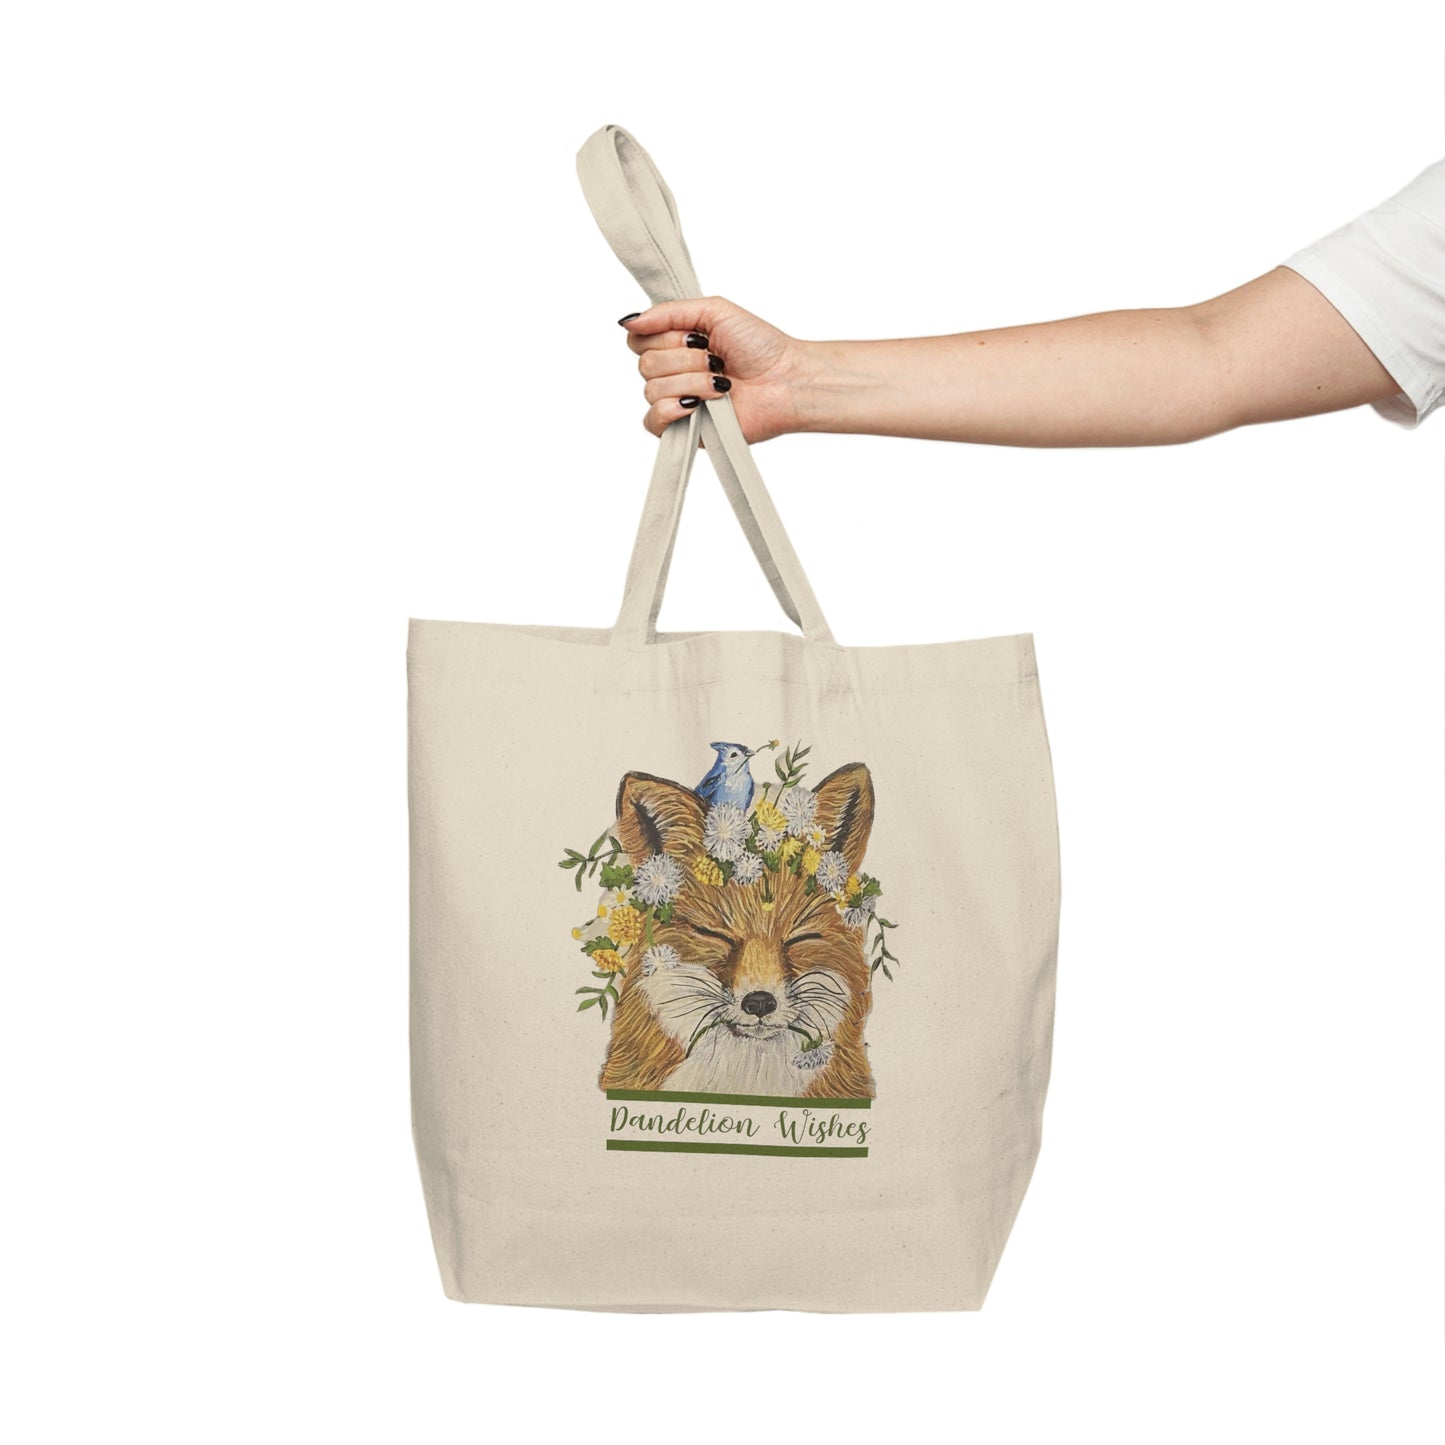 Dandelion Wishes - Canvas Shopping Tote